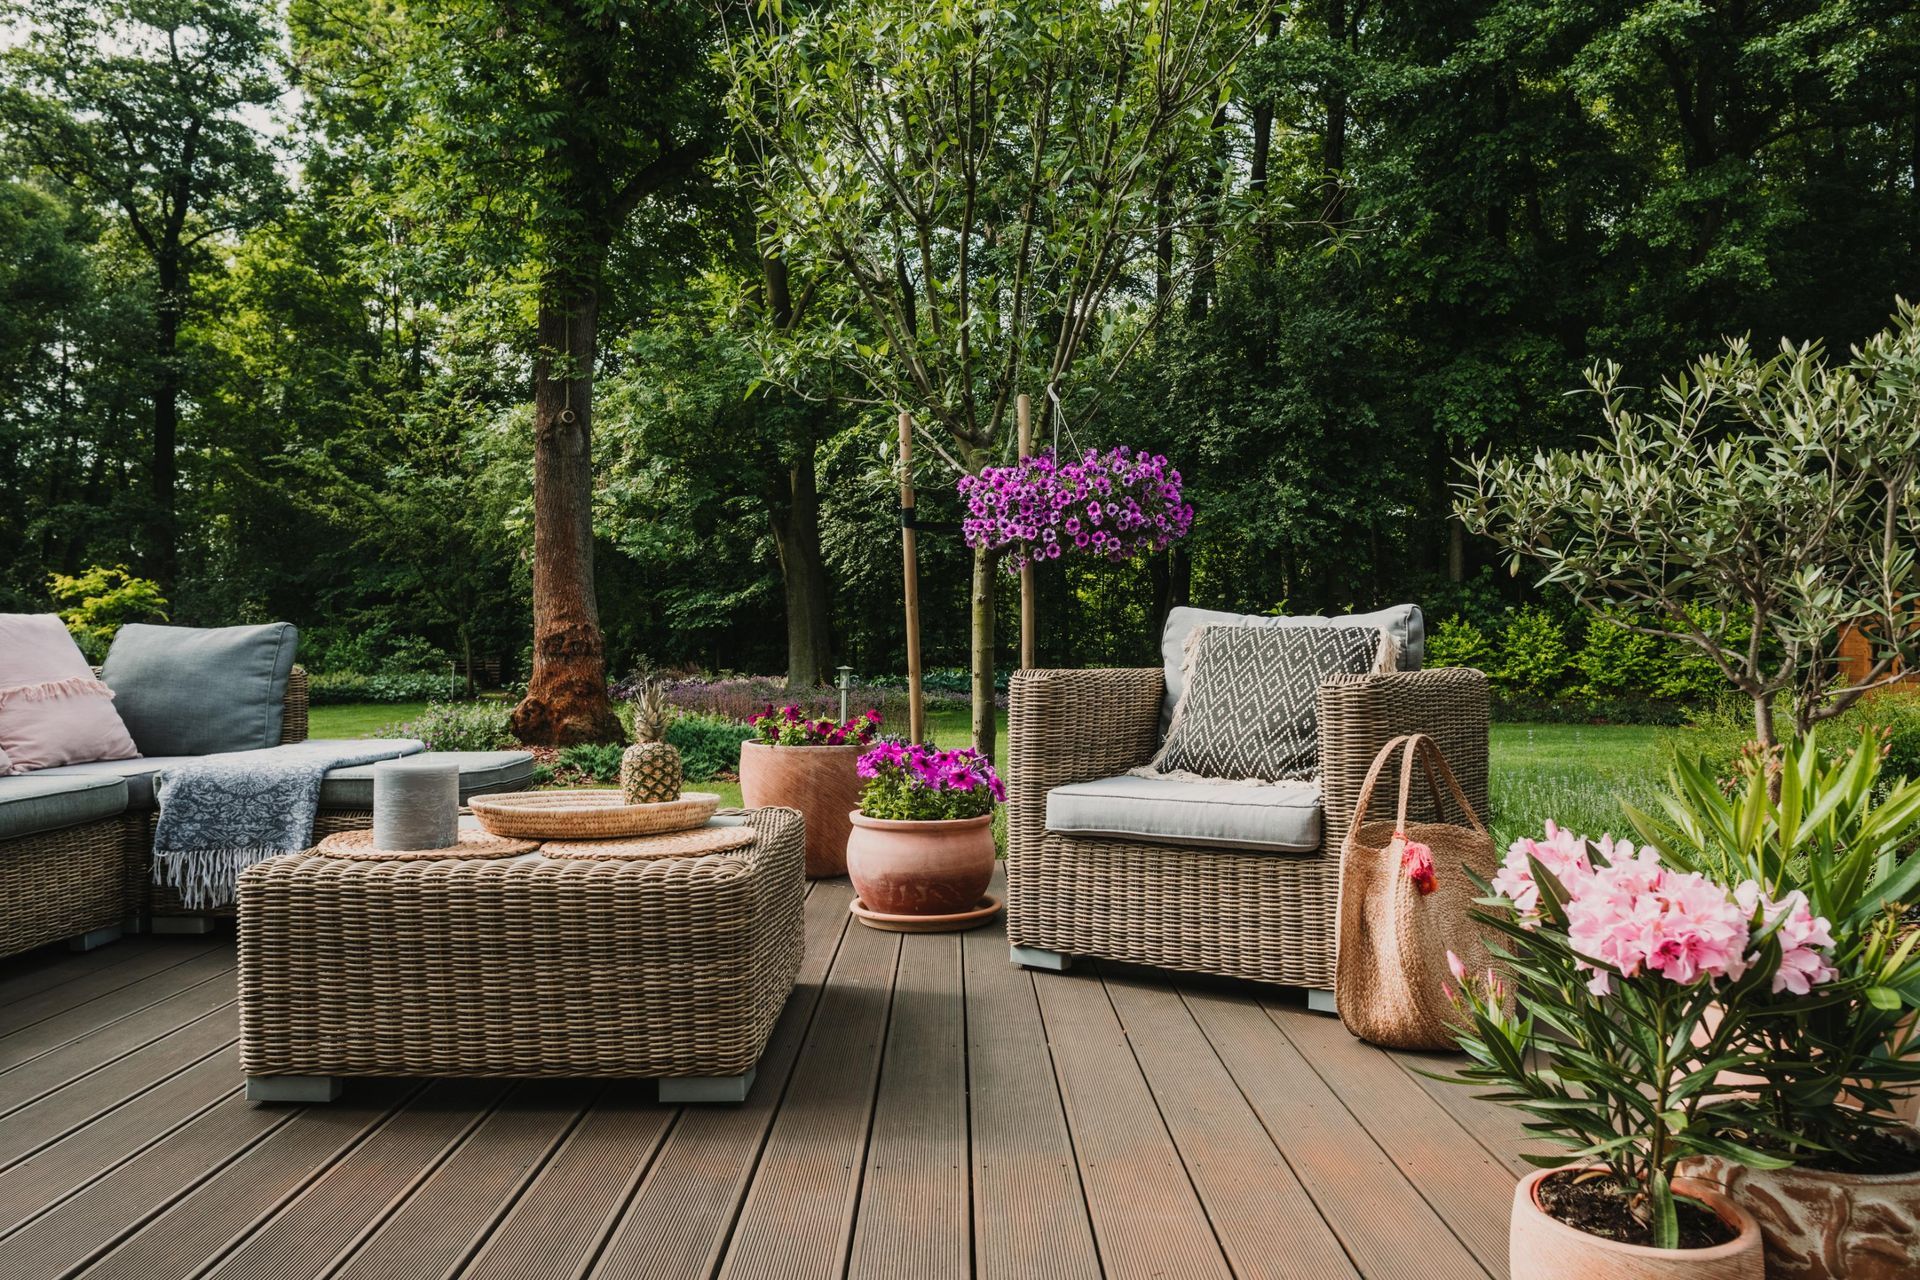 A wooden deck with wicker furniture and potted plants.